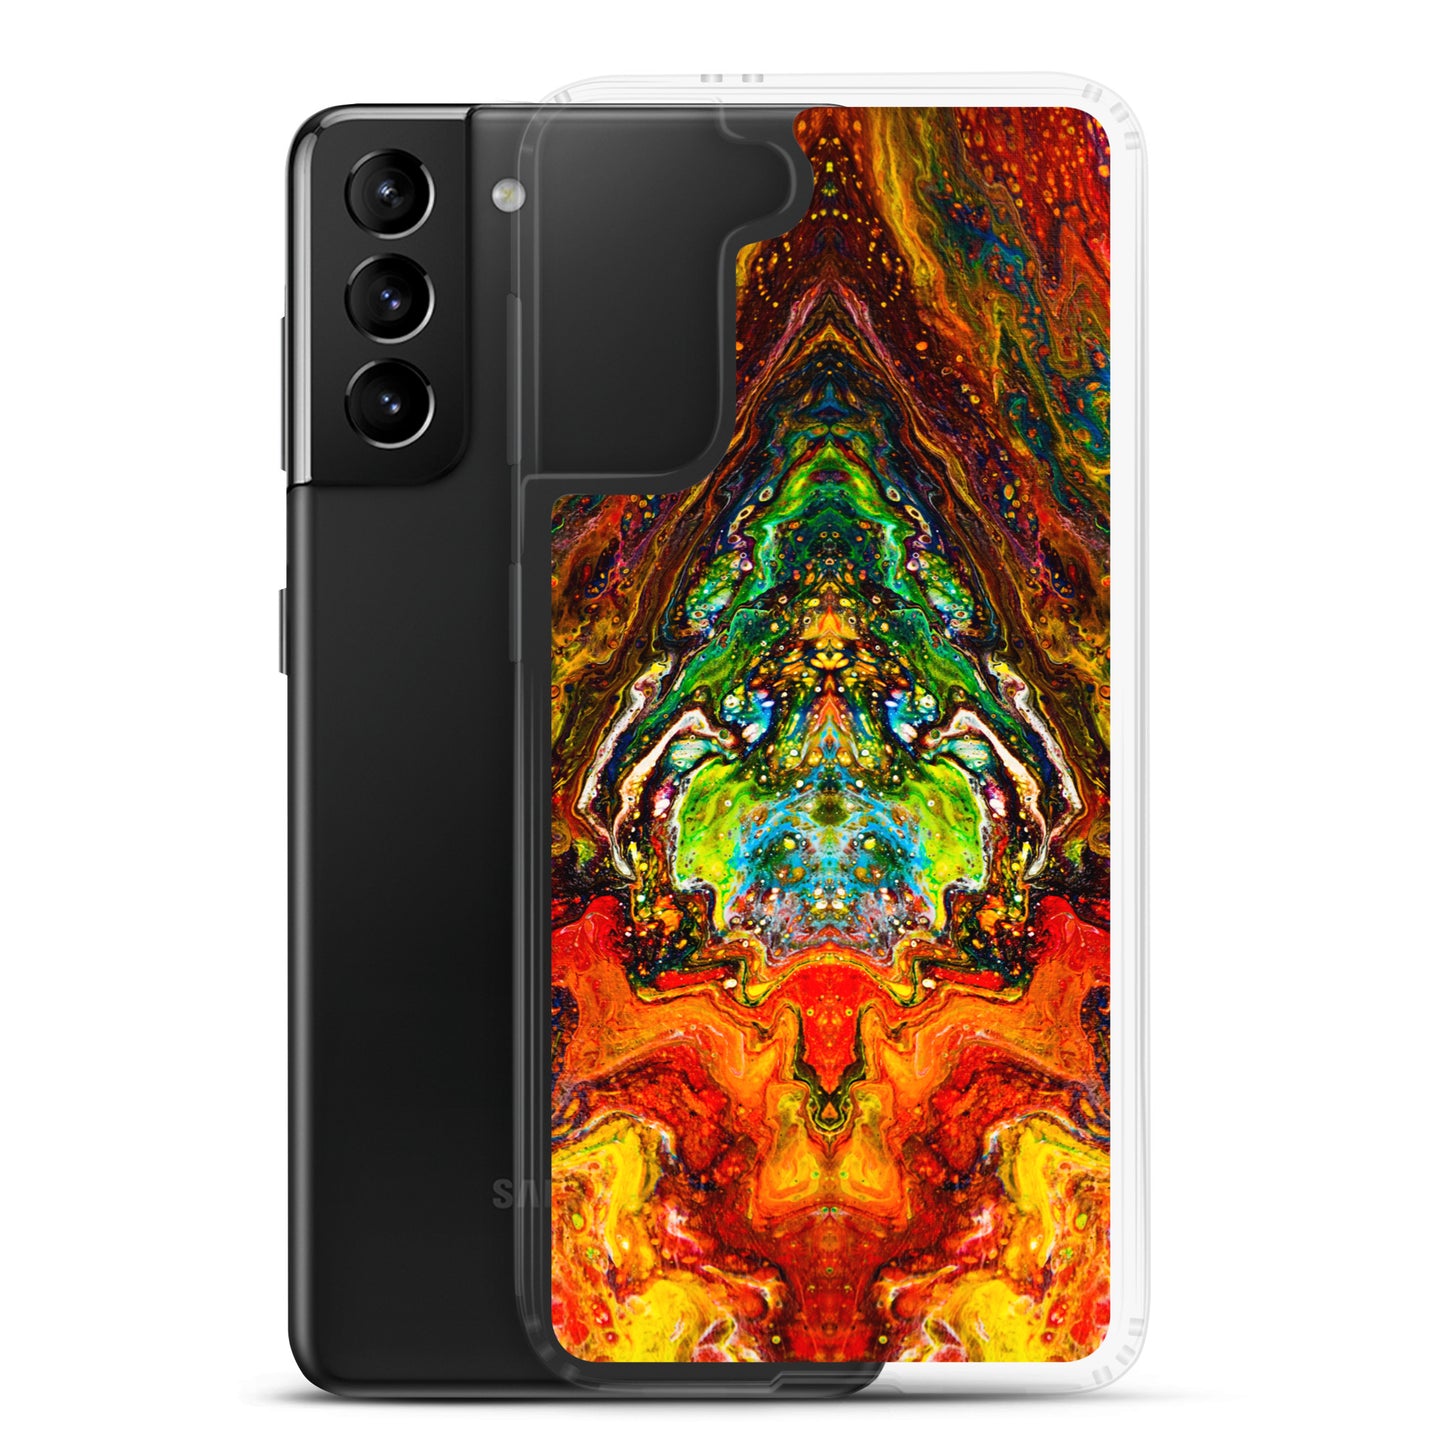 NightOwl Studio Custom Phone Case Compatible with Samsung Galaxy, Slim Cover for Wireless Charging, Drop and Scratch Resistant, Psychedelic Something